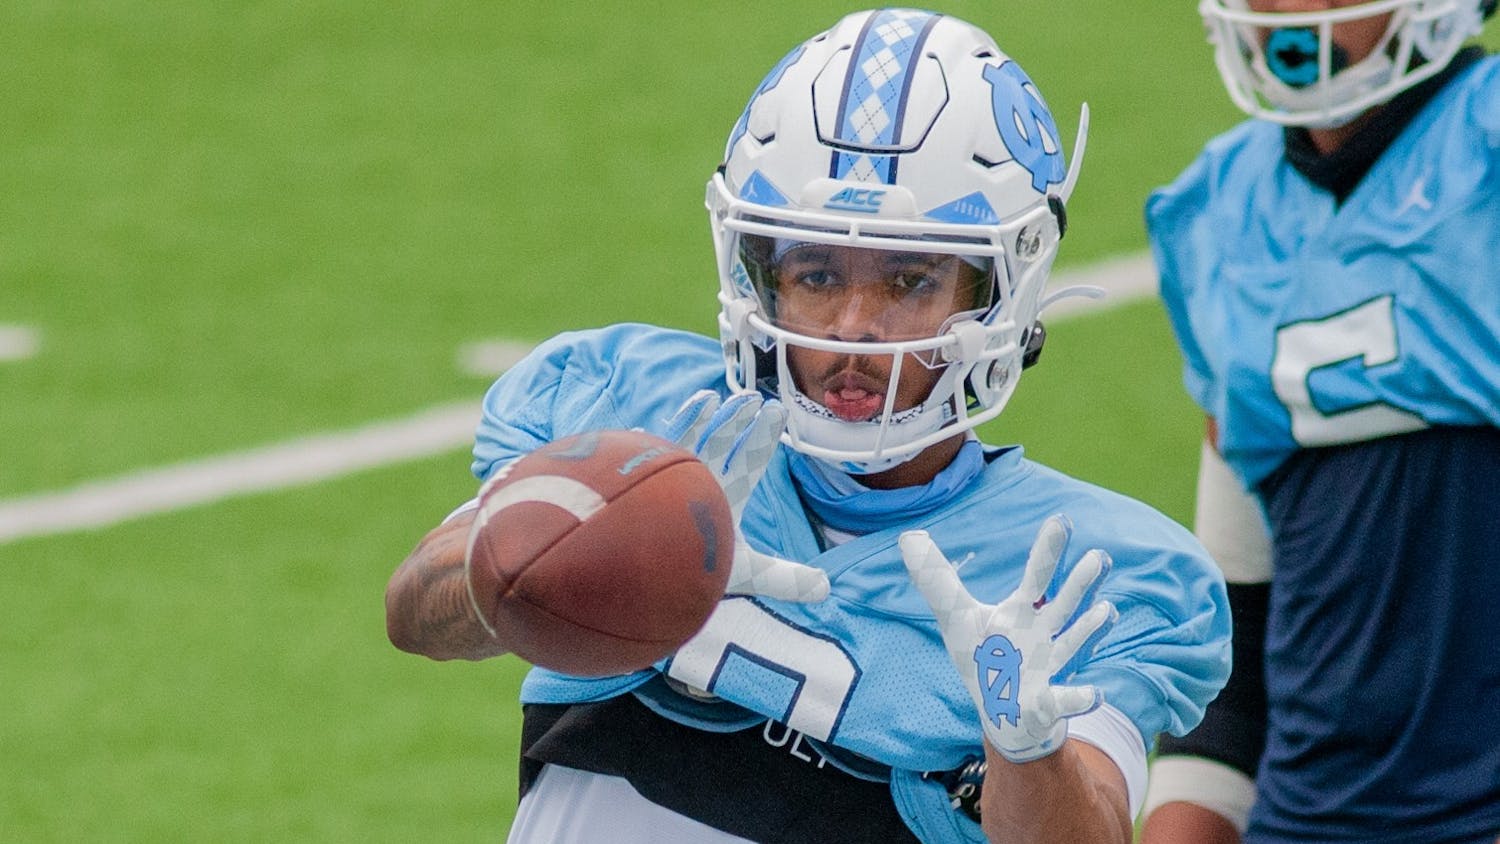 UNC Football Practice, March 27, 2021